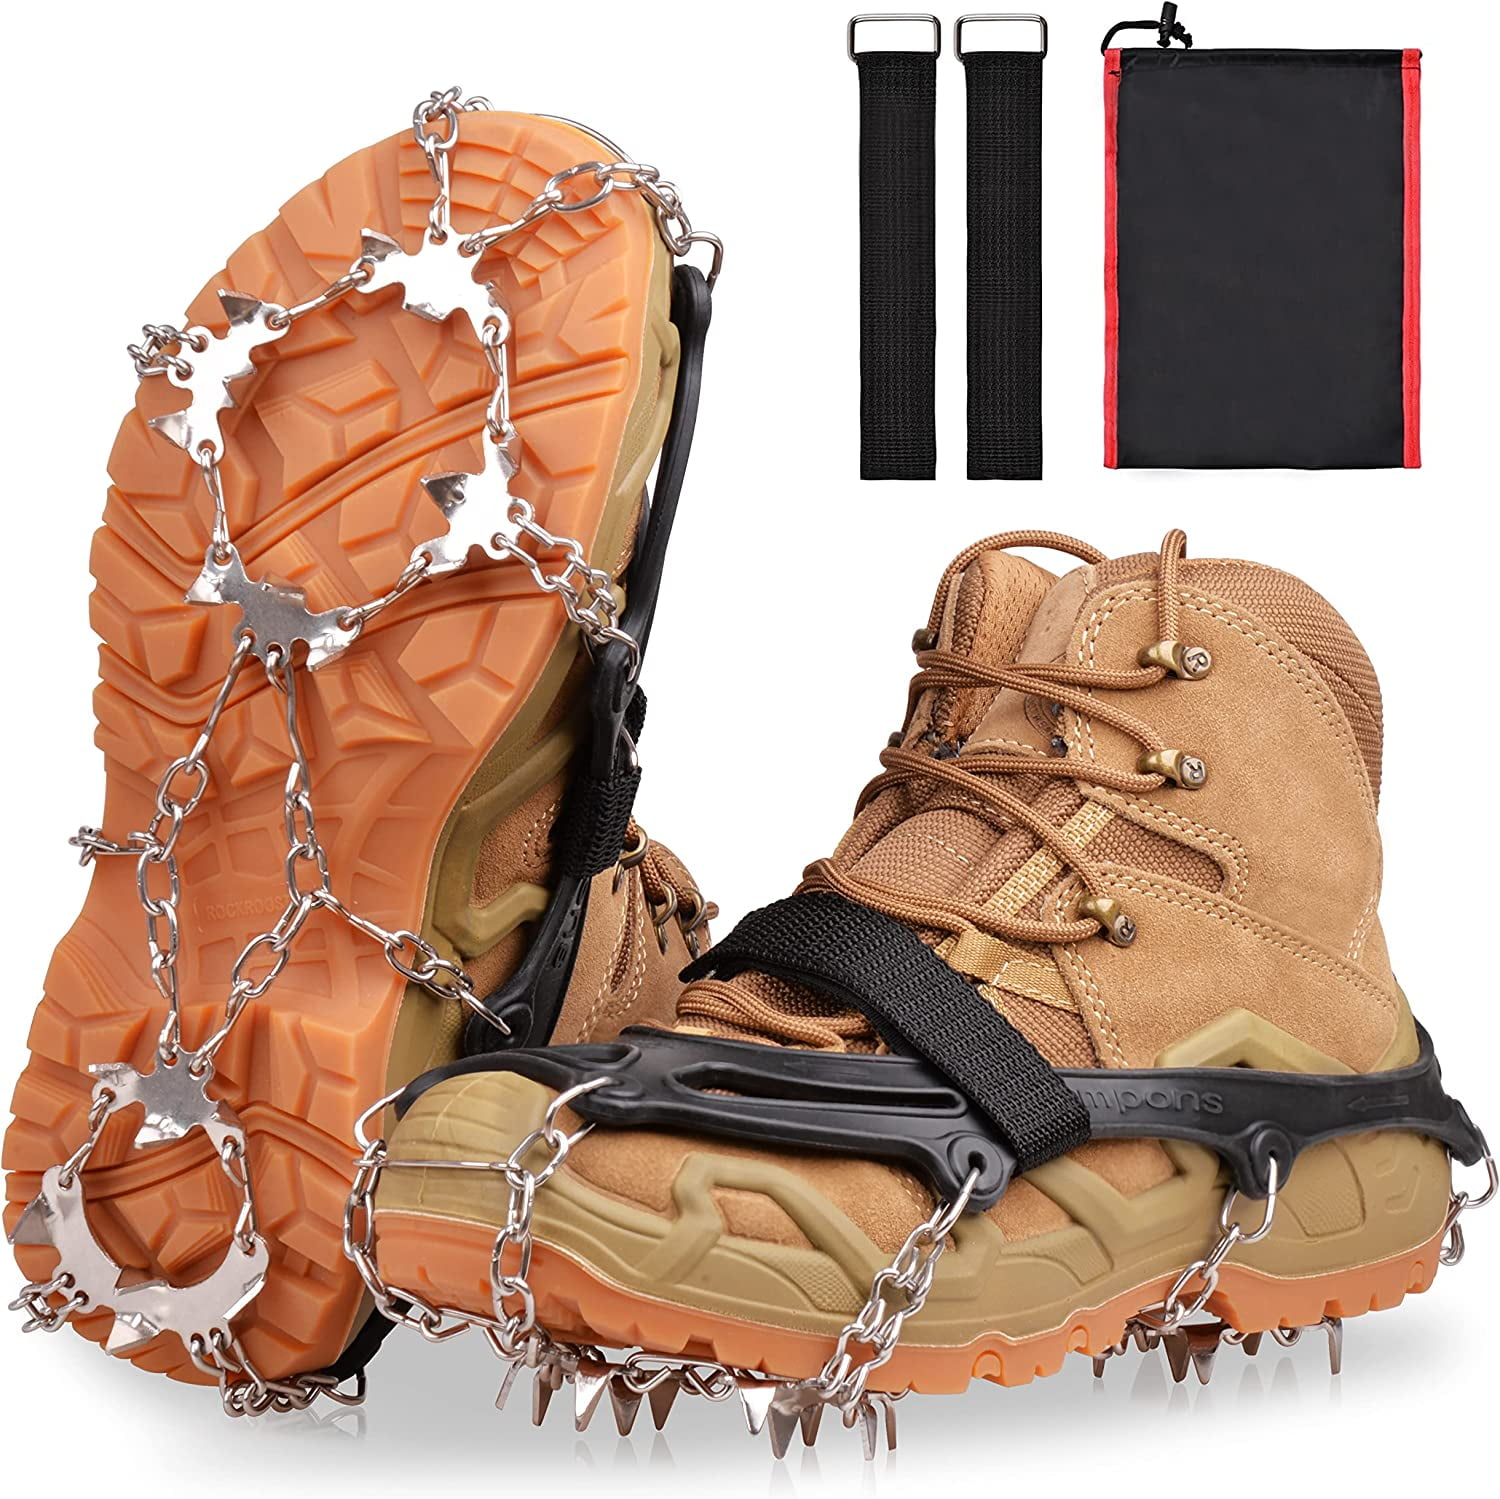  Voroar Crampons Ice Cleats Traction Snow Grips for Hiking Boots  and Shoes, Shoe Spikes for Men Women Kids, Anti-Rust, Safe Protect for  Walking on The Ice, Snow and Mud : Everything